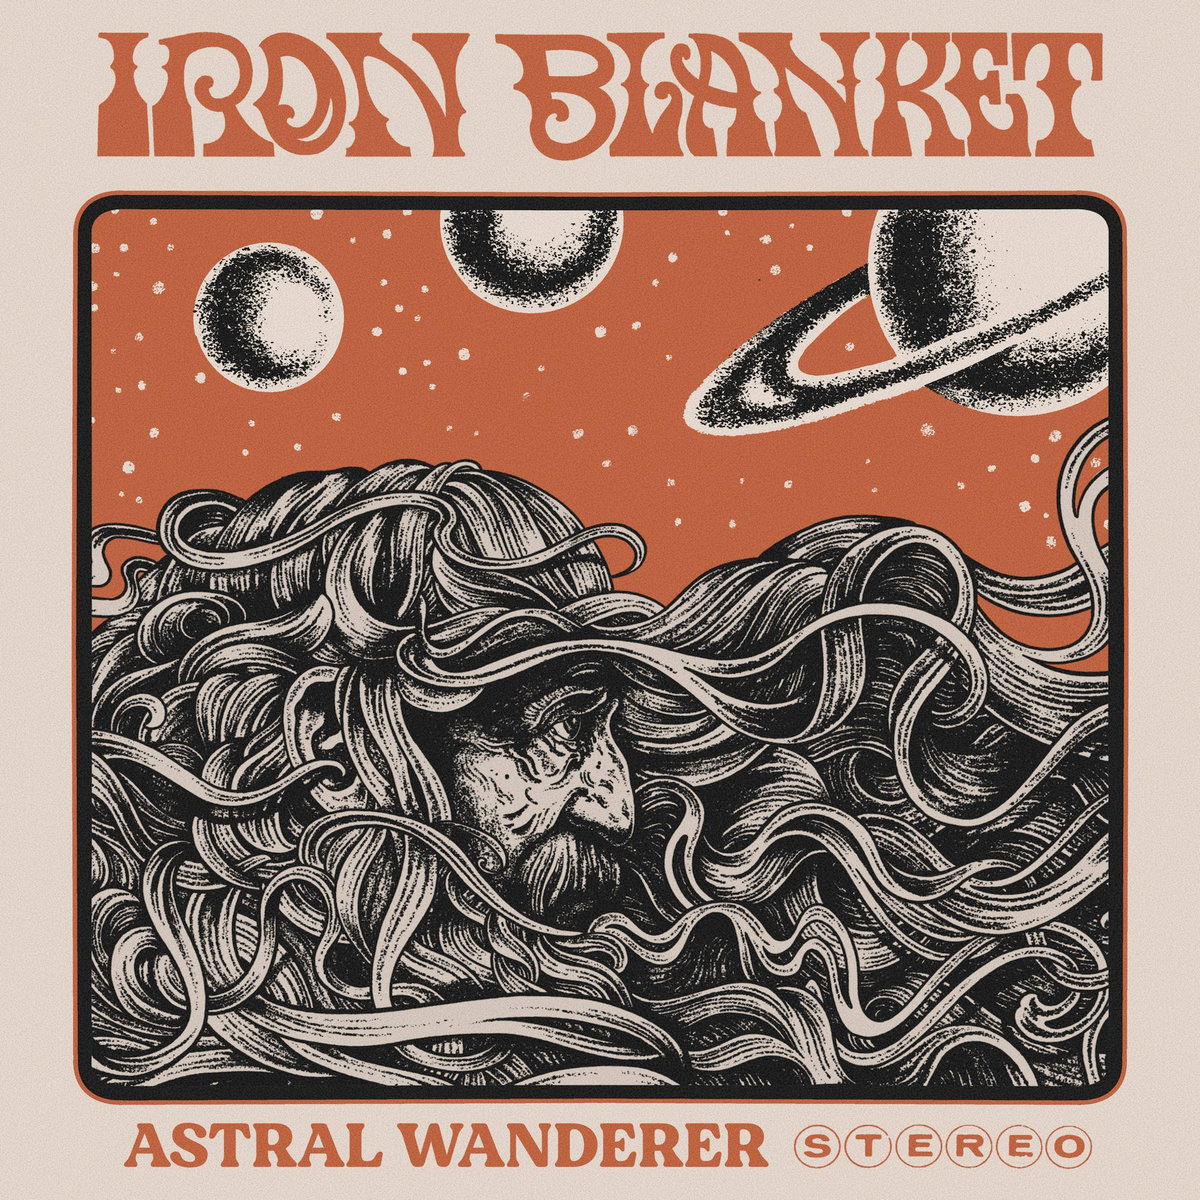 Astral Wanderer by Iron Blanket